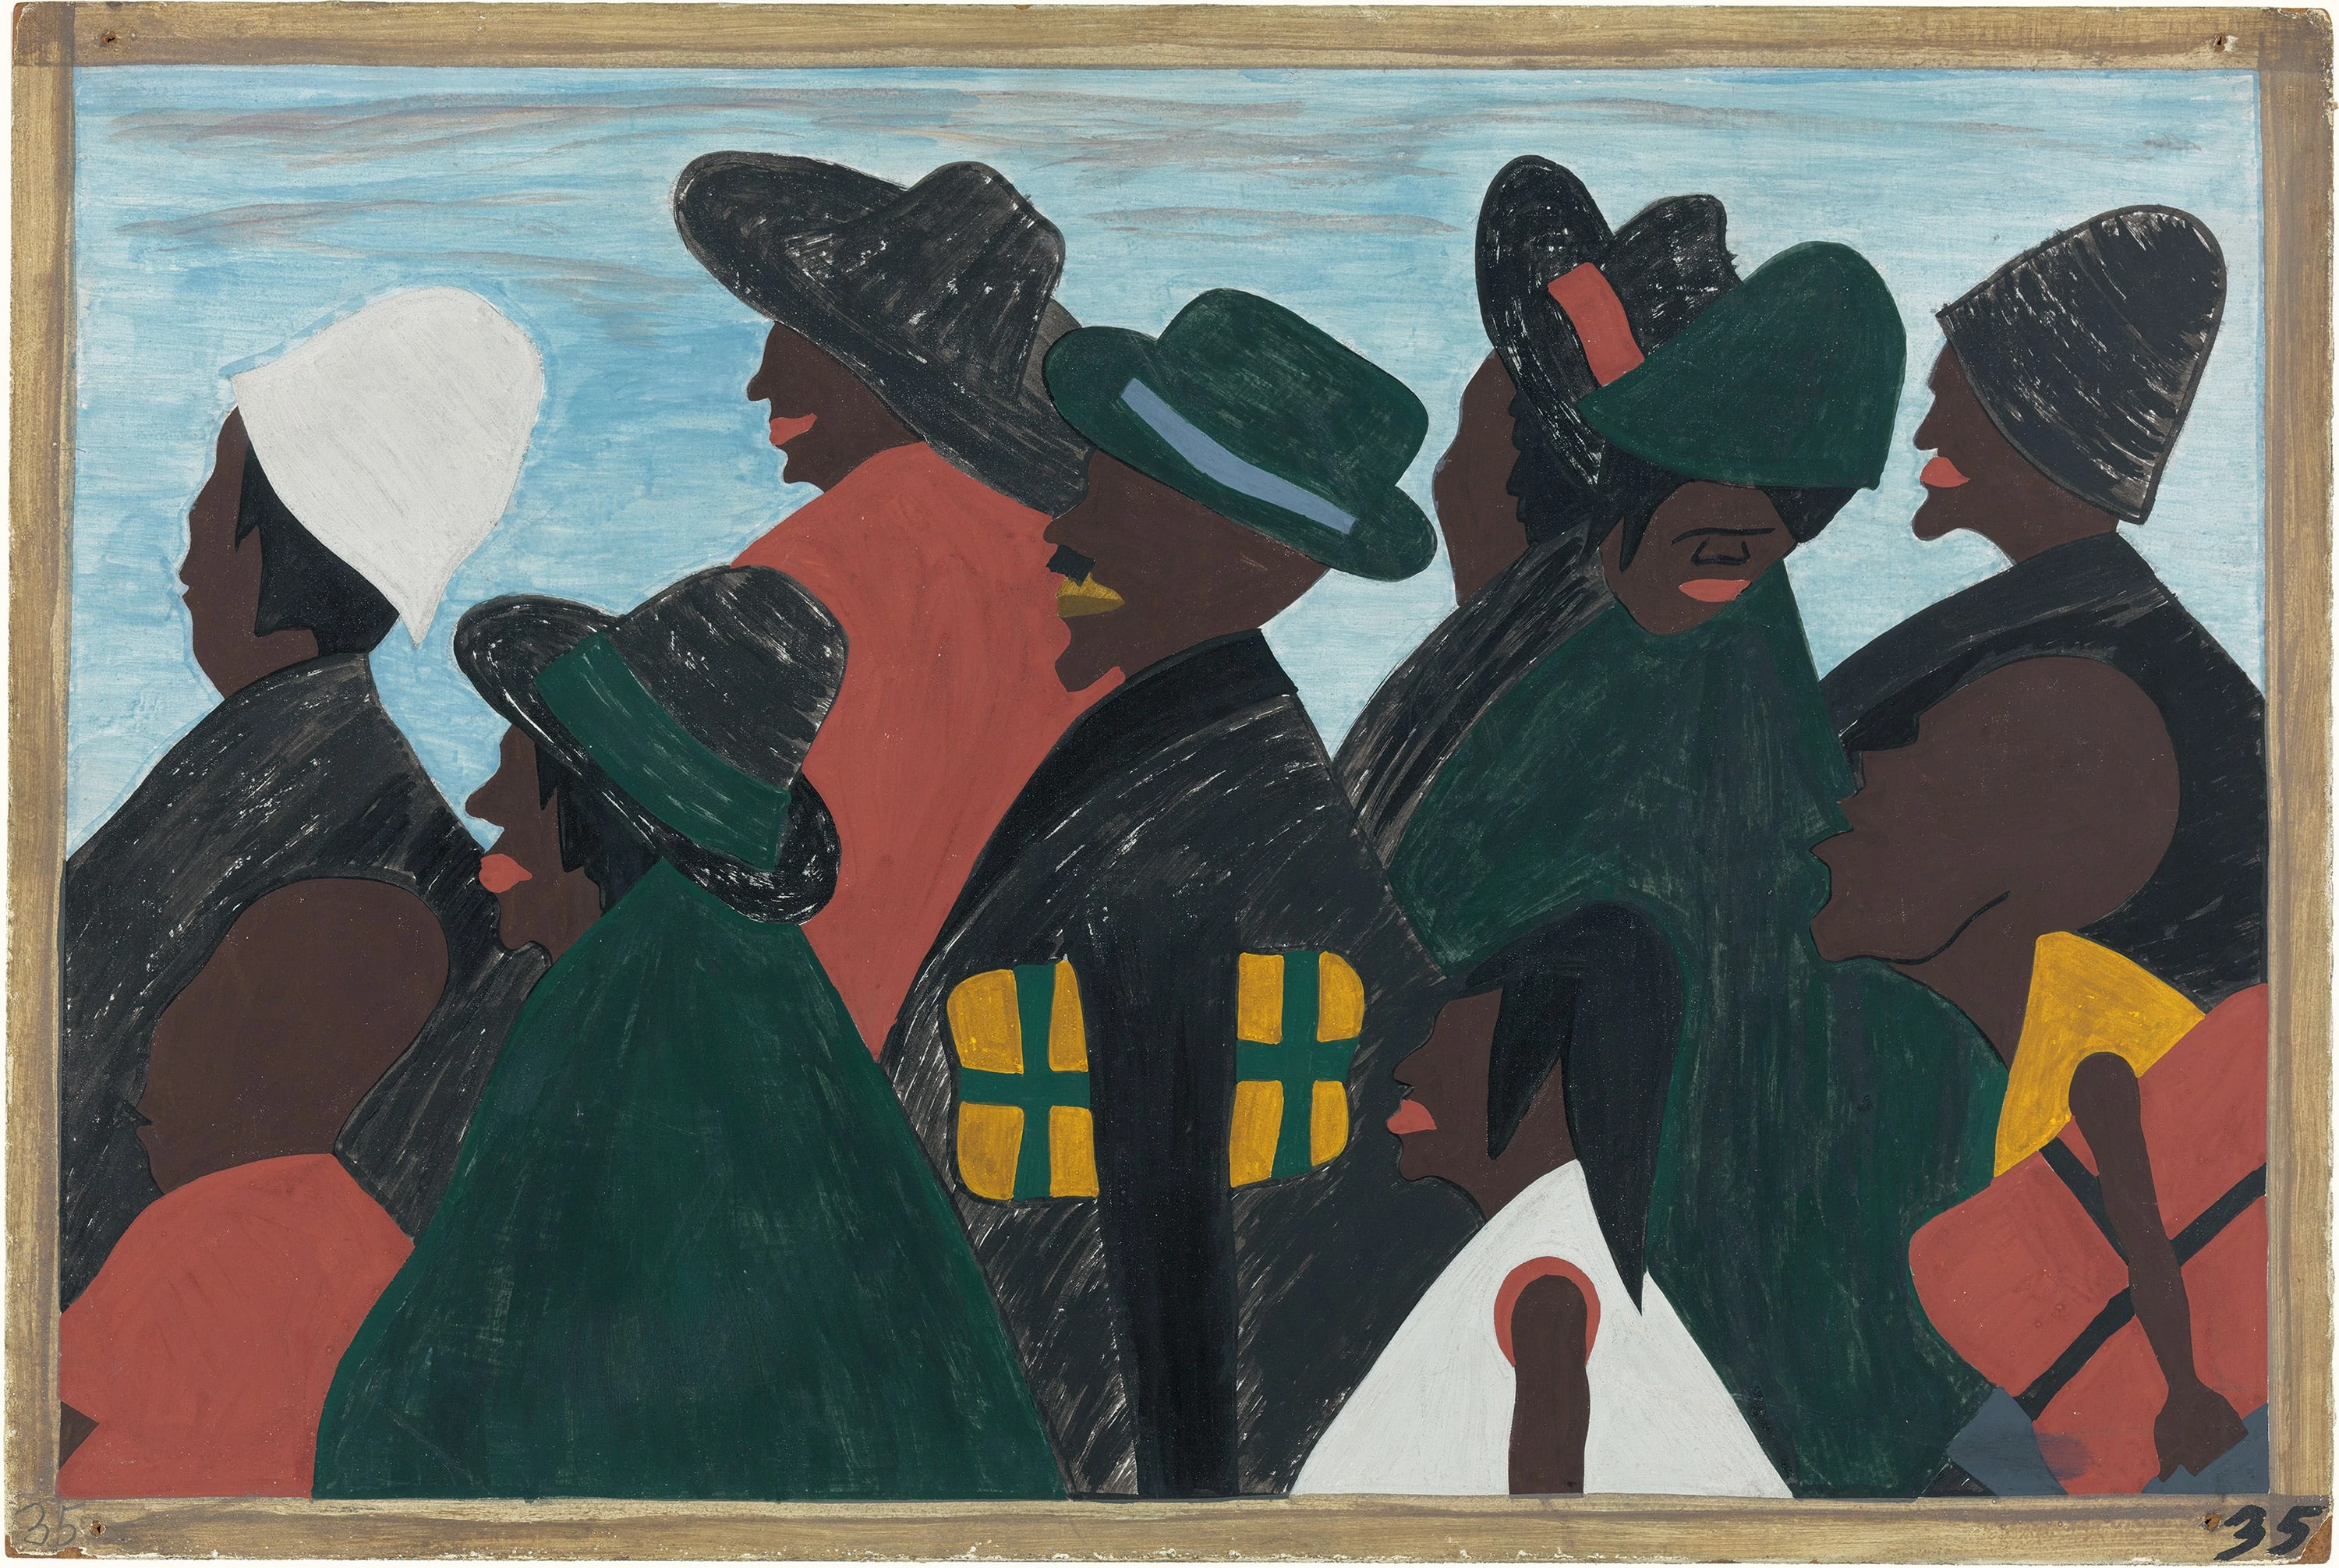 Migration Series No.35: They left the South in great numbers. They arrived in the North in great numbers, Jacob Lawrence